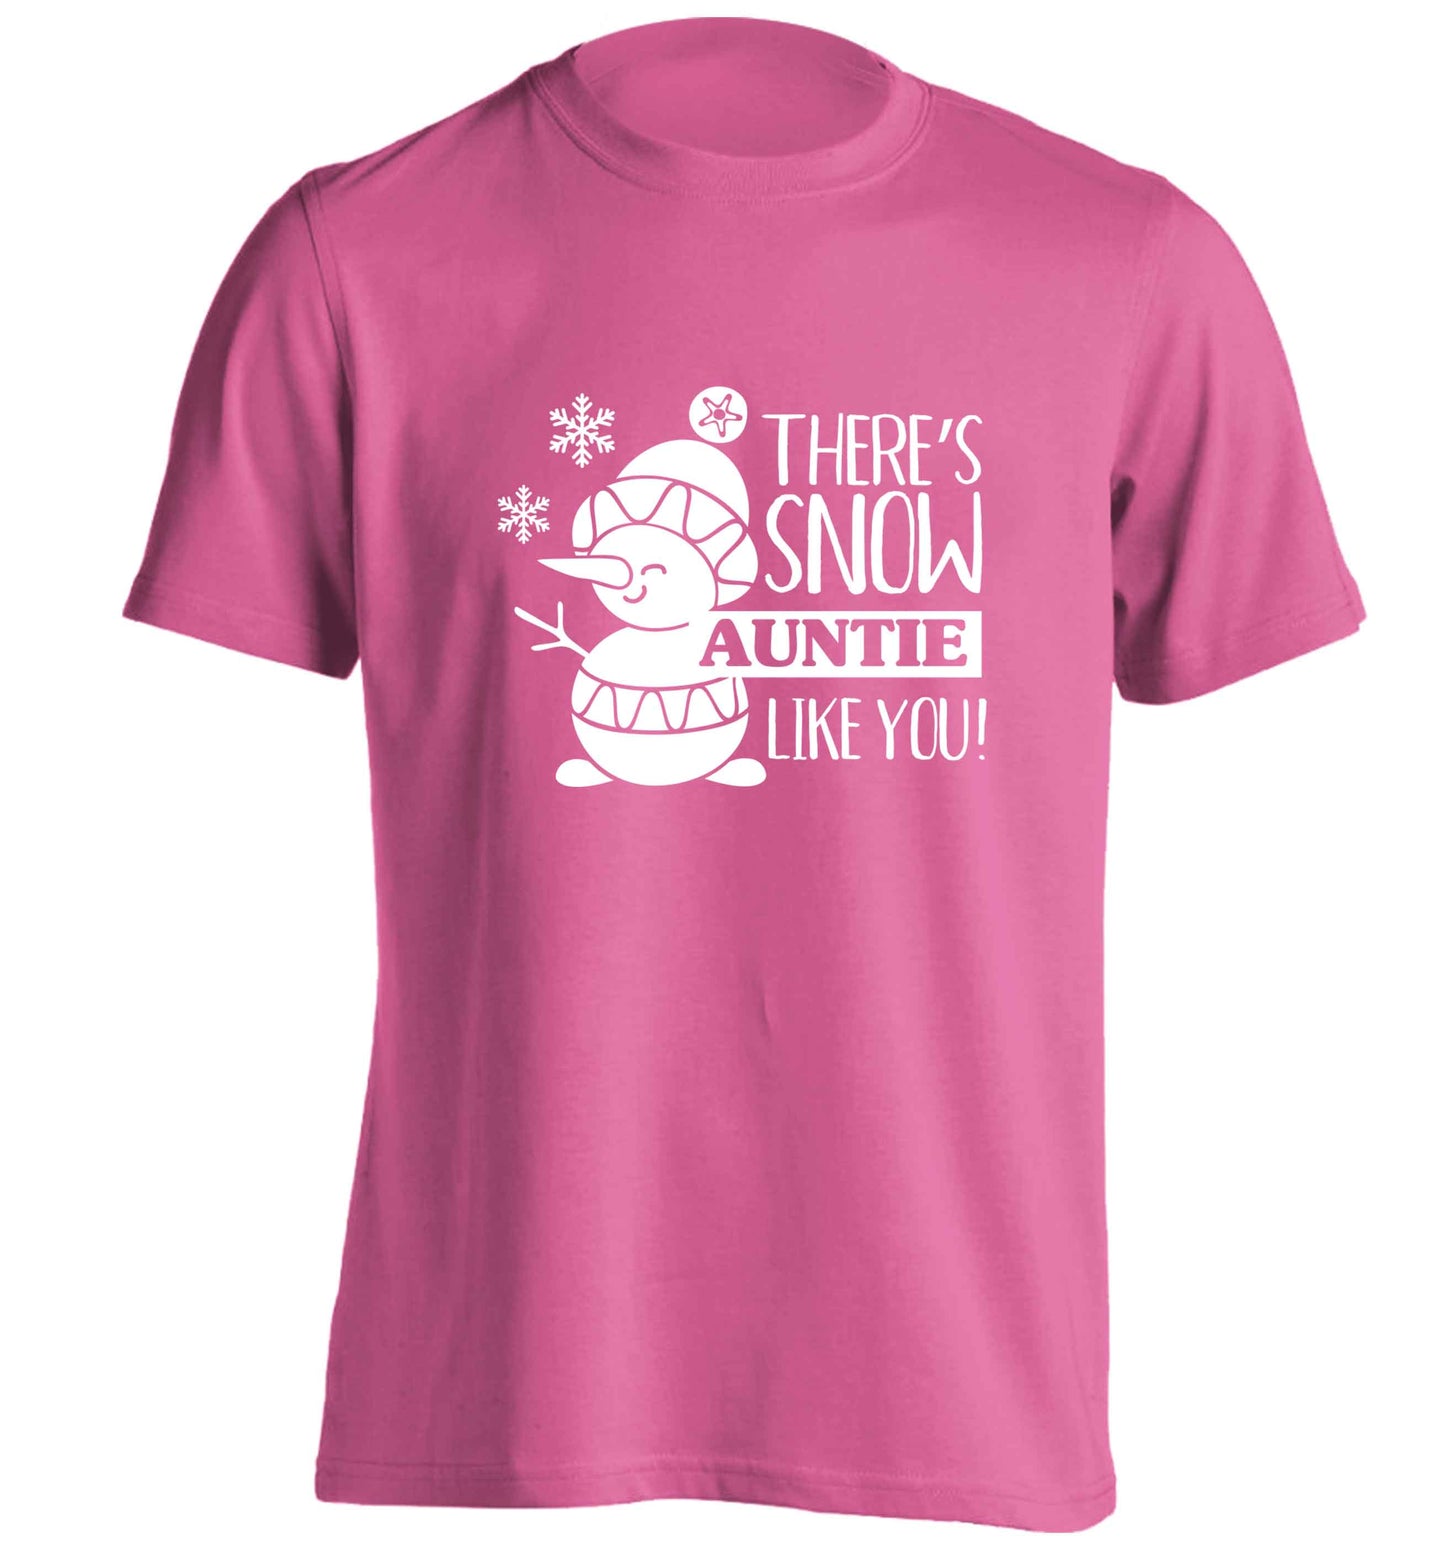 There's snow auntie like you adults unisex pink Tshirt 2XL